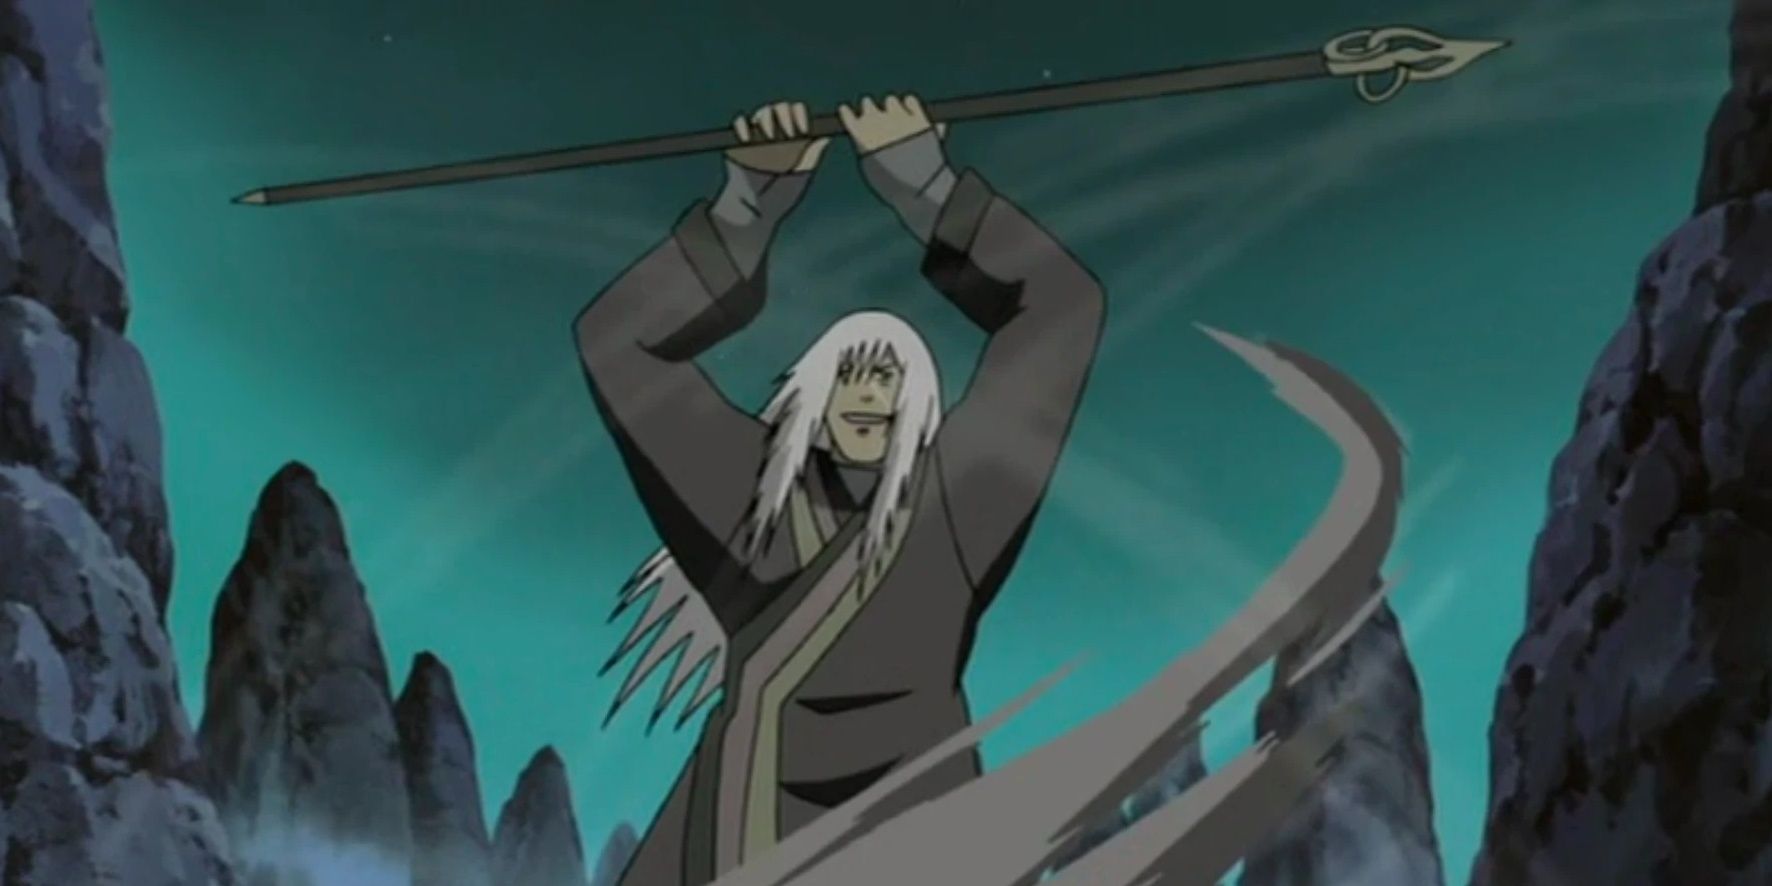 Kazuma lifts his staff to power up an attack in Naruto.